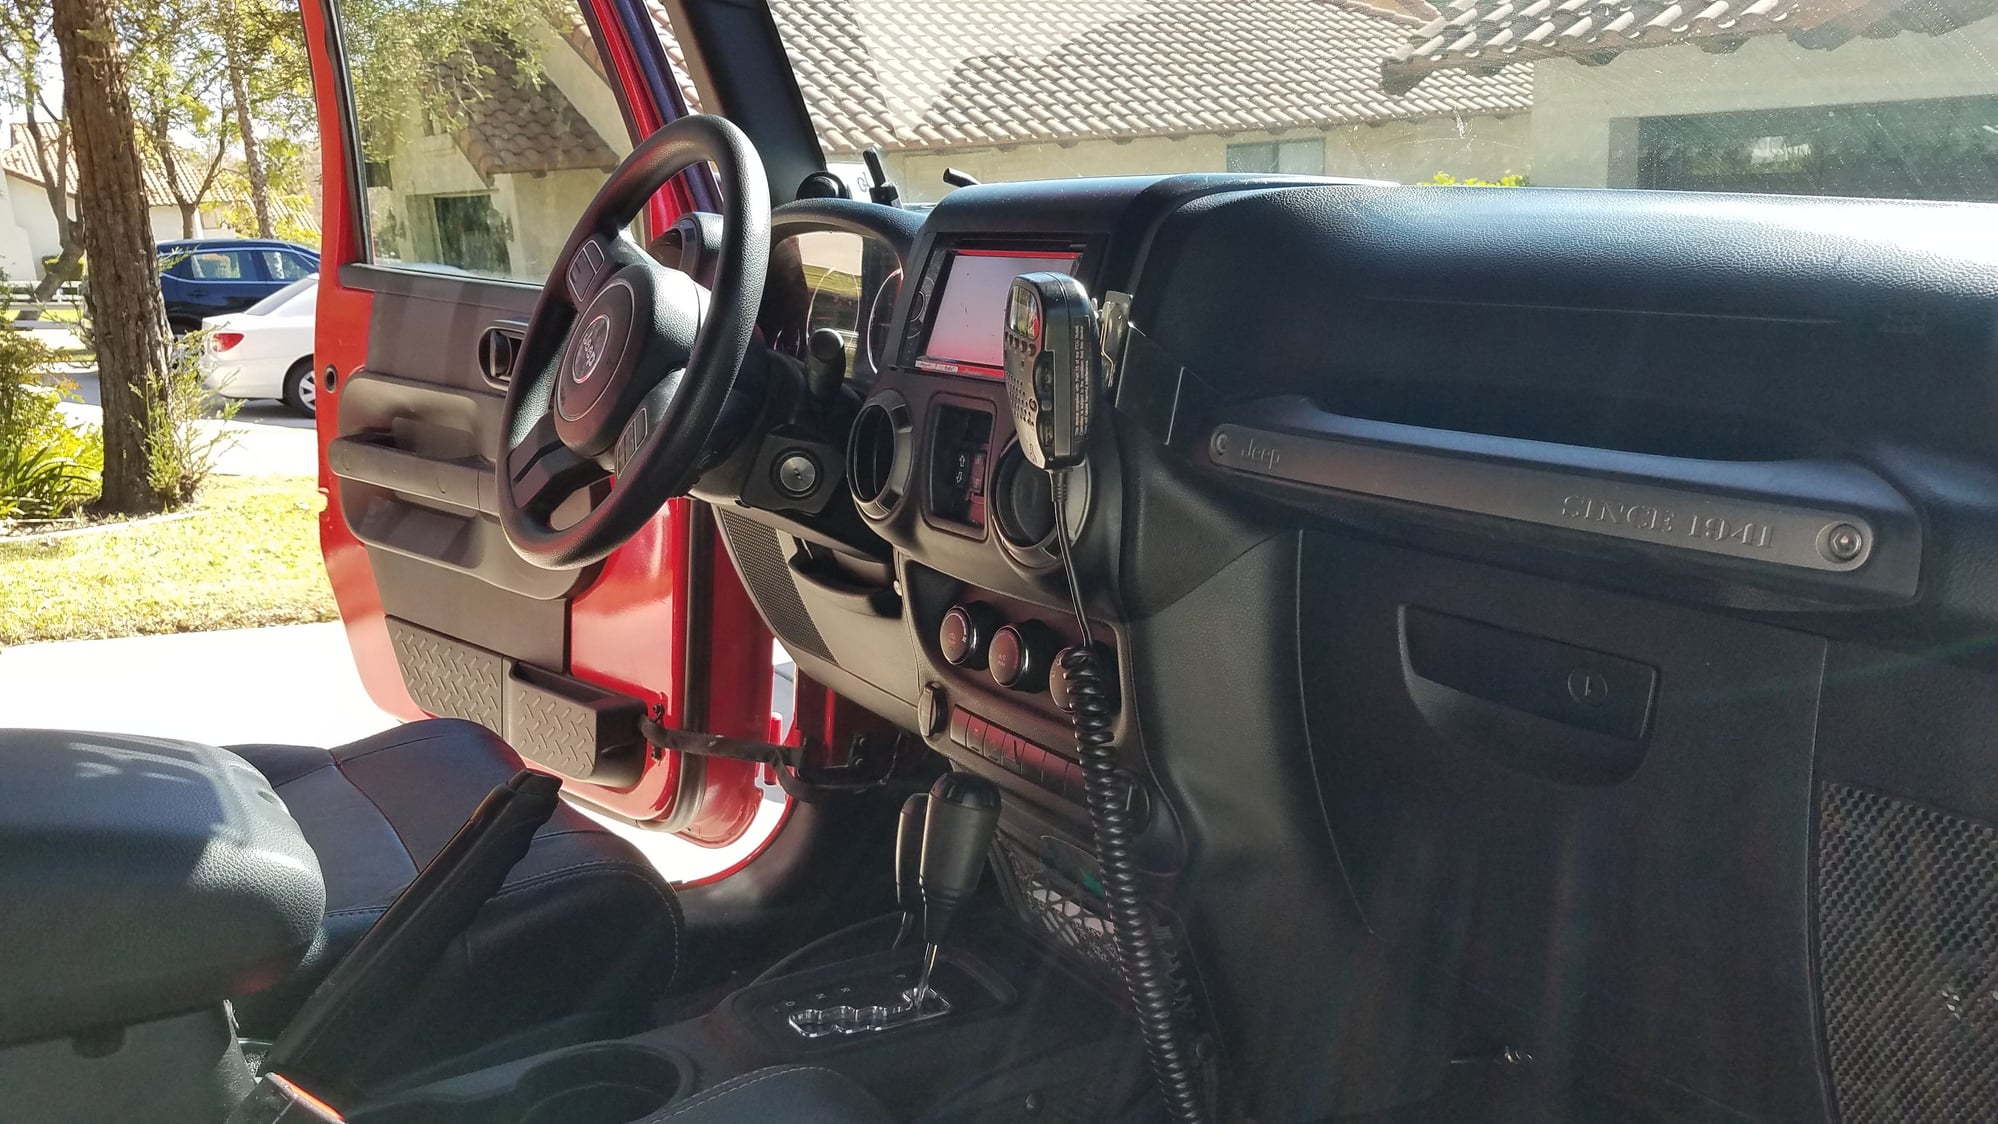 2012 Jeep Wrangler - Jeep Wrangler JKU with Currie RJ 60's, Leather , Long arm etc. - Used - VIN 1C4BJWDG3CL238654 - 52,500 Miles - 6 cyl - 4WD - Automatic - Red - Rancho Cucamonga, CA 91737, United States